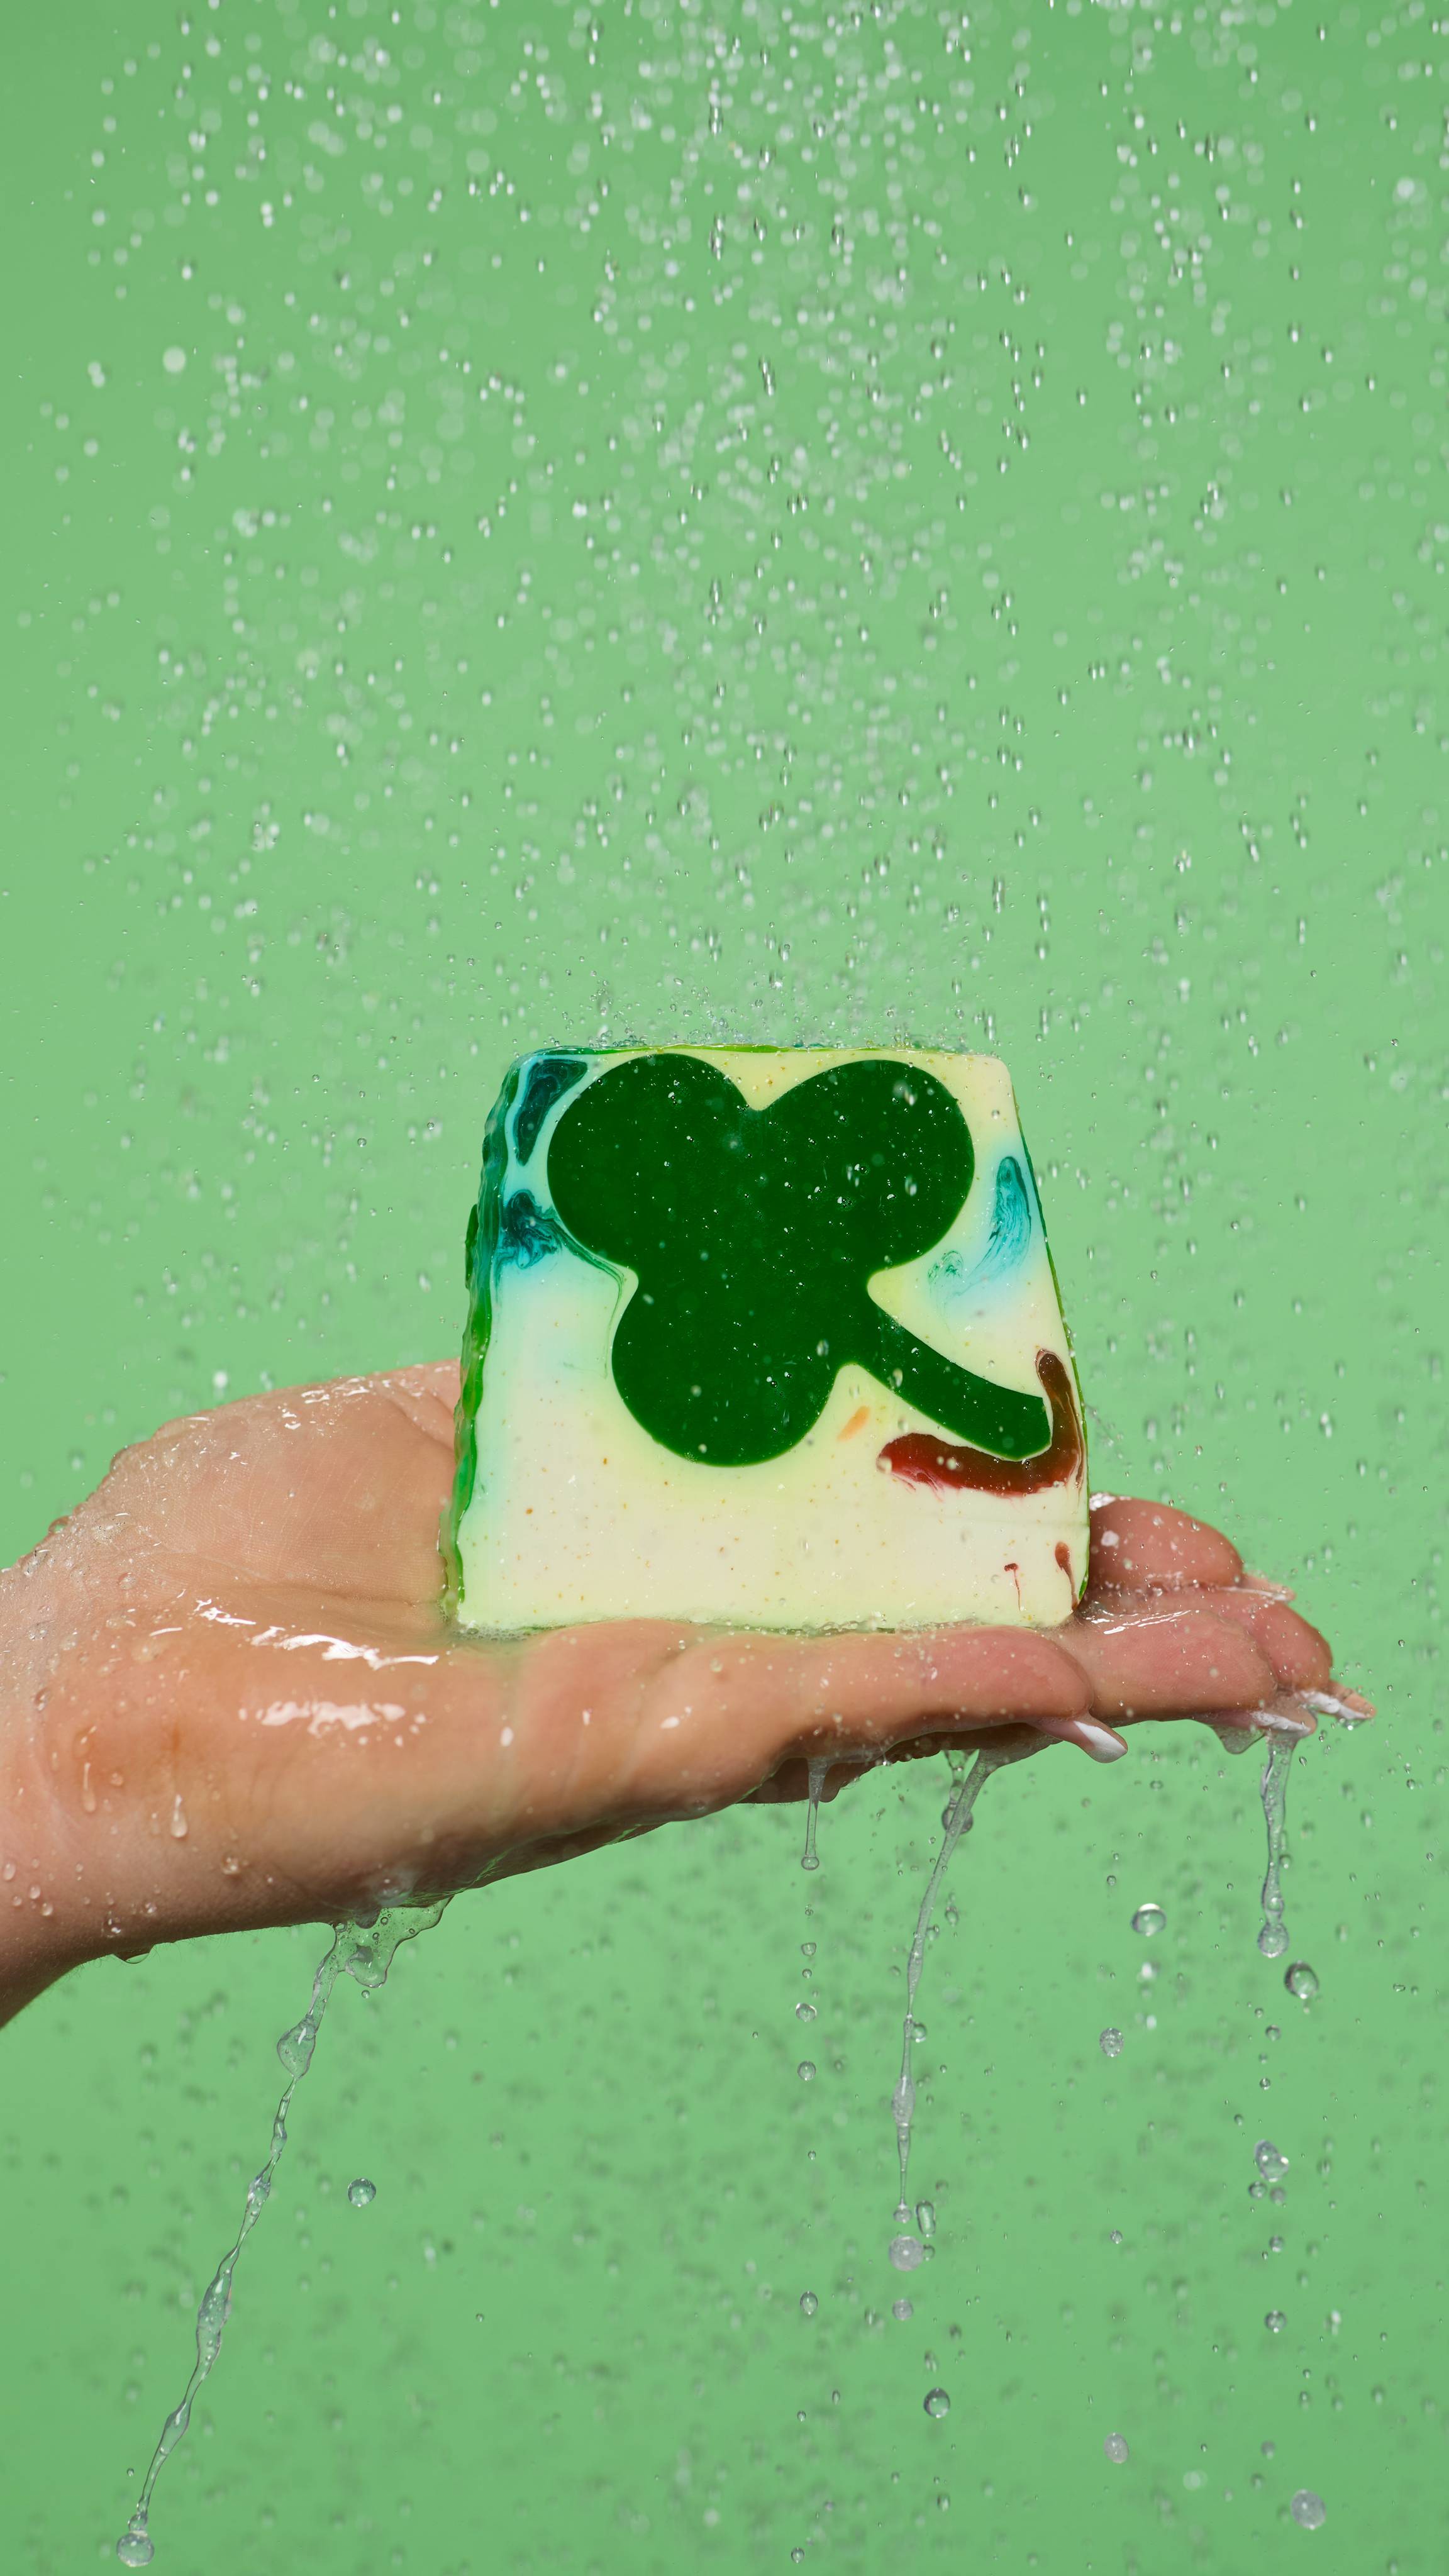 The image shows a close-up of the model's hand held flat under running shower water as the Alban Eilir soap is standing on their palm.